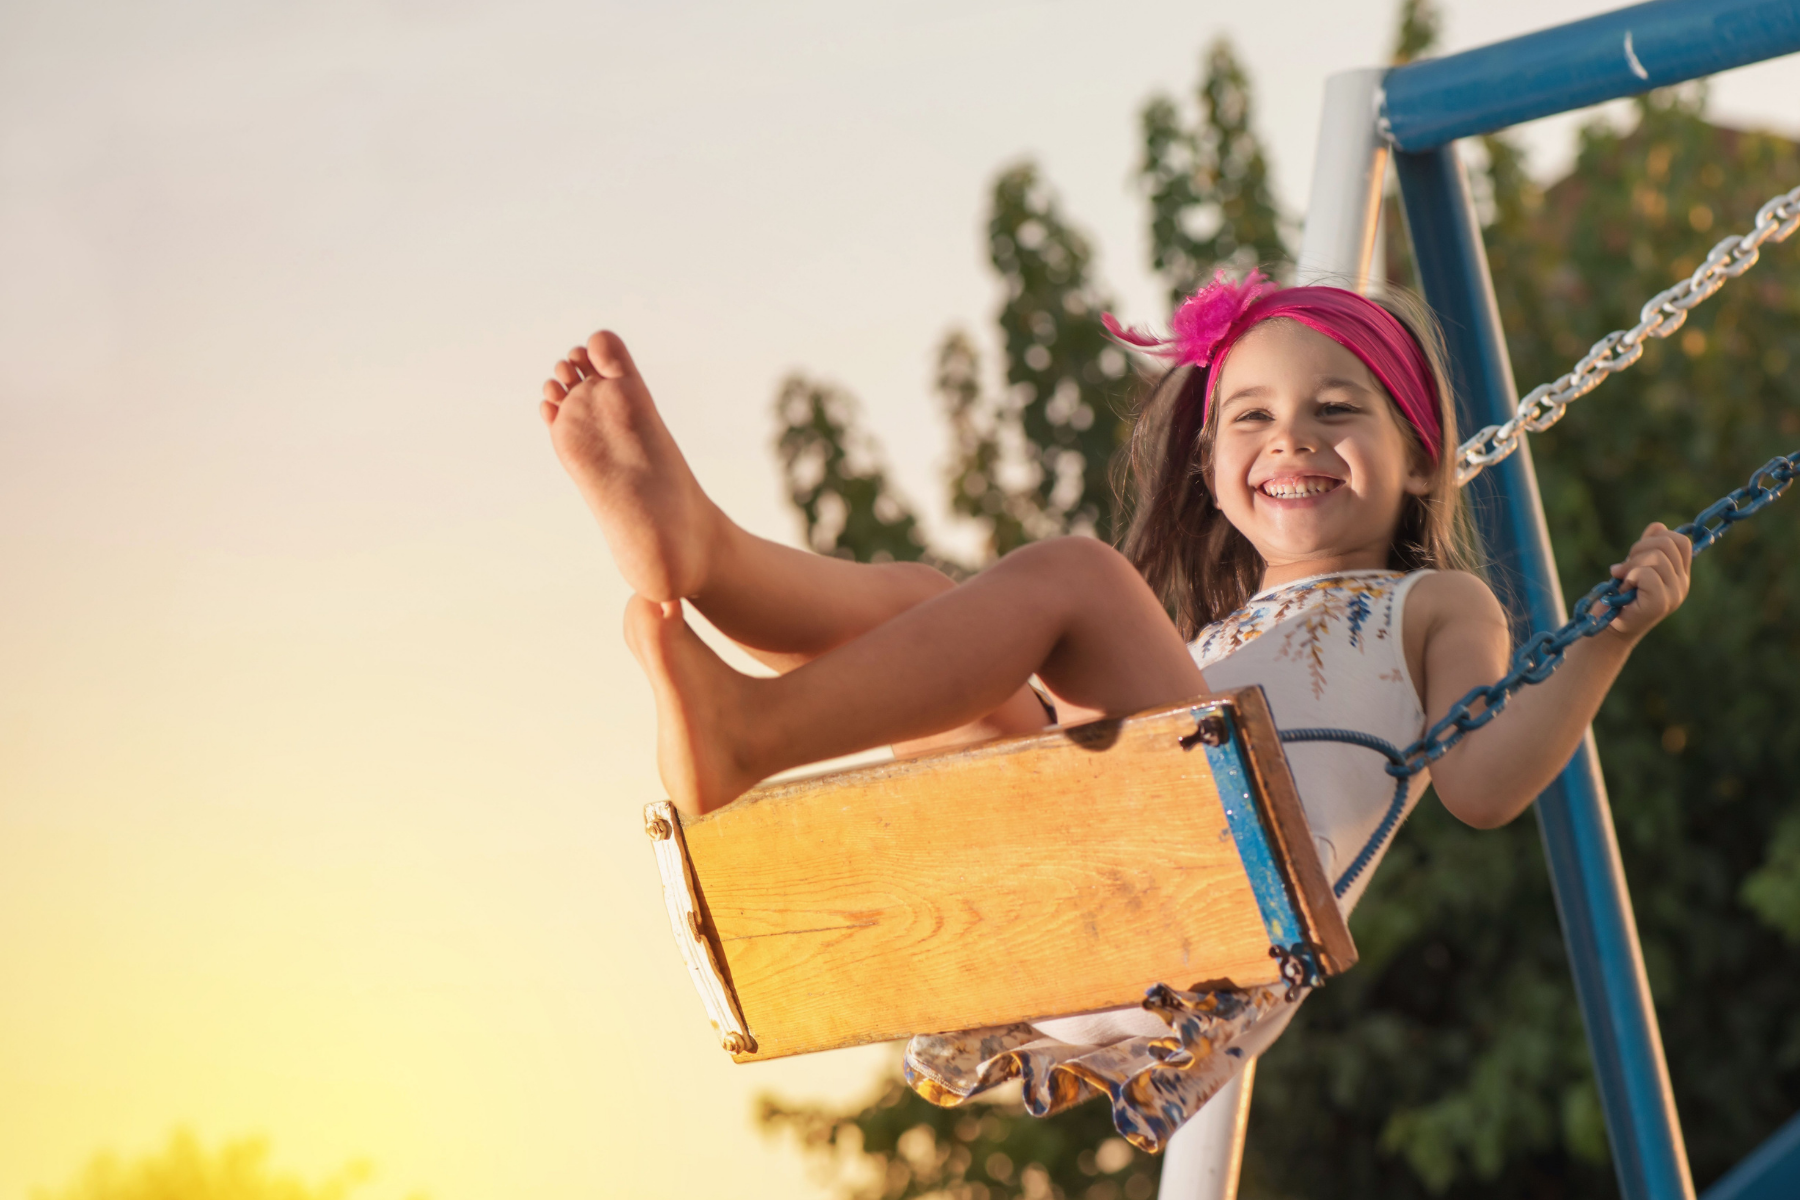 Best Backyard Swing Sets and Playsets for Kids